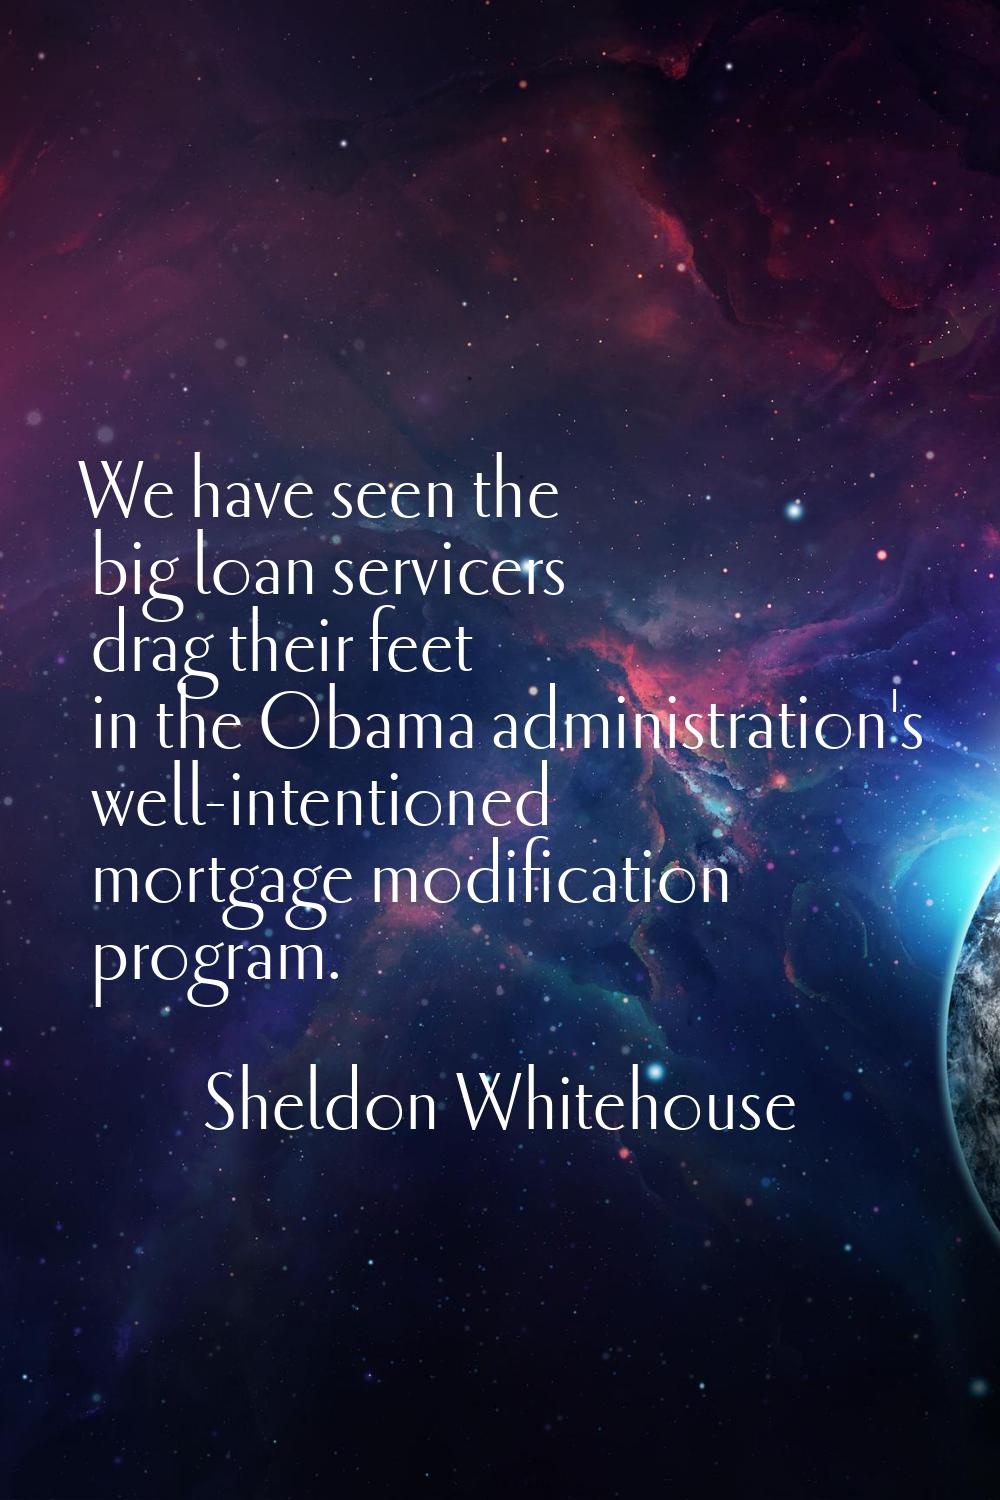 We have seen the big loan servicers drag their feet in the Obama administration's well-intentioned 